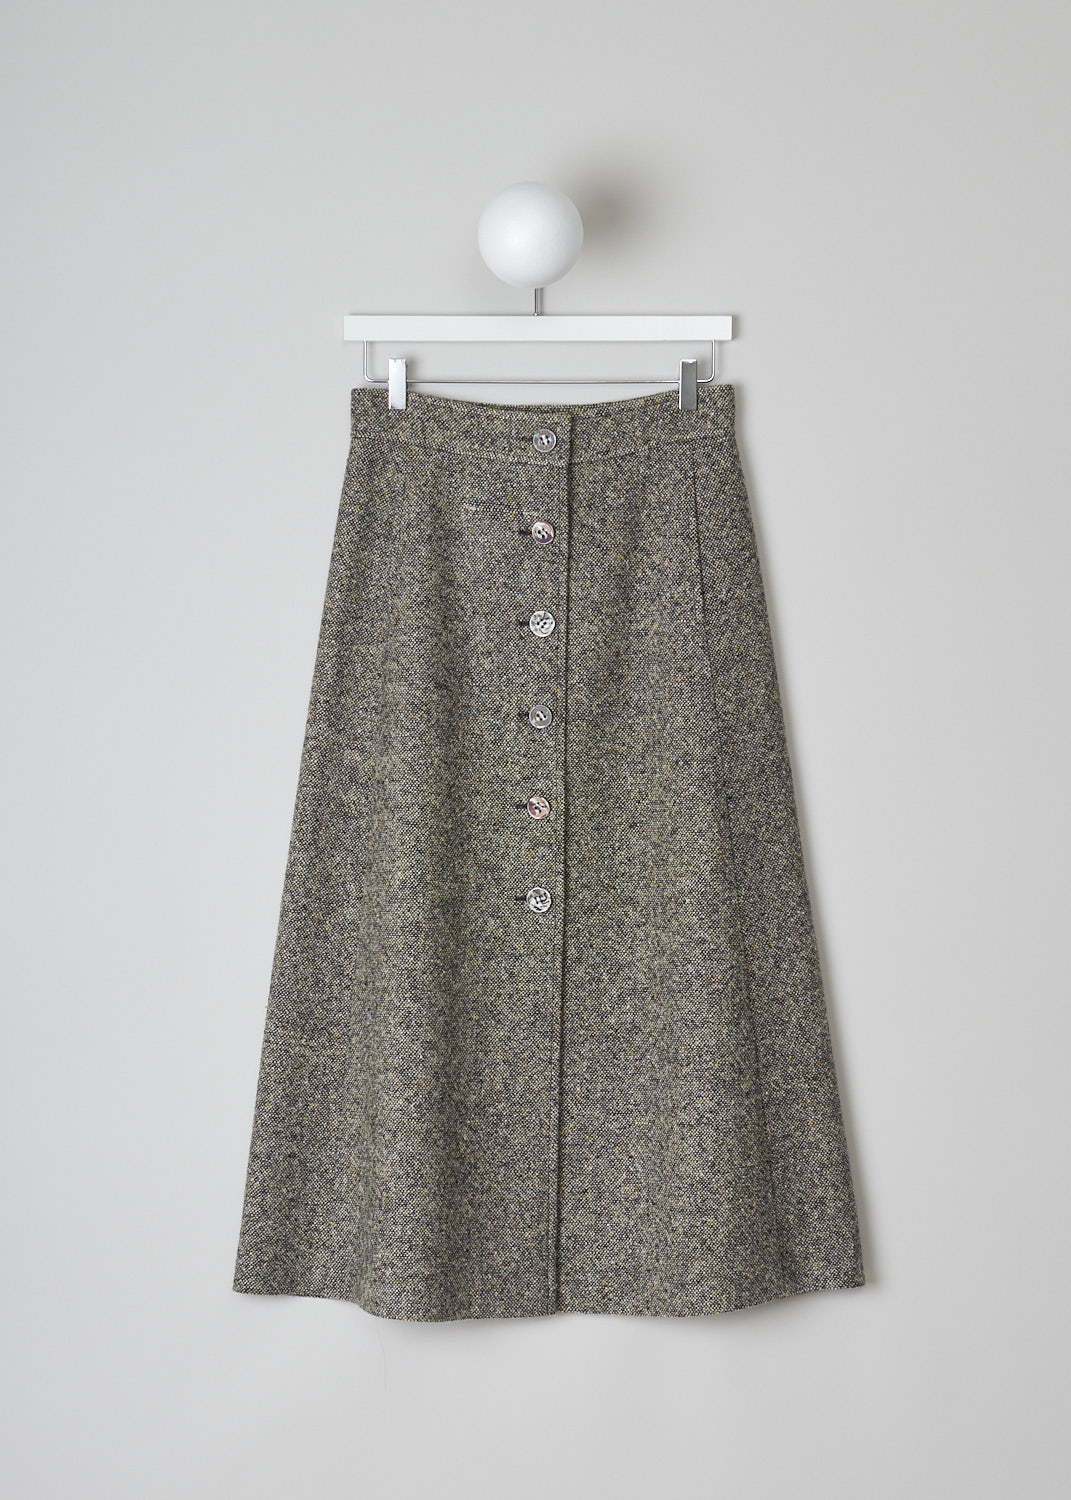 CHLOÃ‰, BUTTONED A-LINE SKIRT IN MAINLY BROWN, CHC21WJU1416522V_MAINLY_BROWN, Brown, Front, This mottled brown A-line midi skirt has a front button closure with ceramic marble buttons in different shades. Concealed slanted pockets can be found in the front. The skirt has a straight hemline. 
